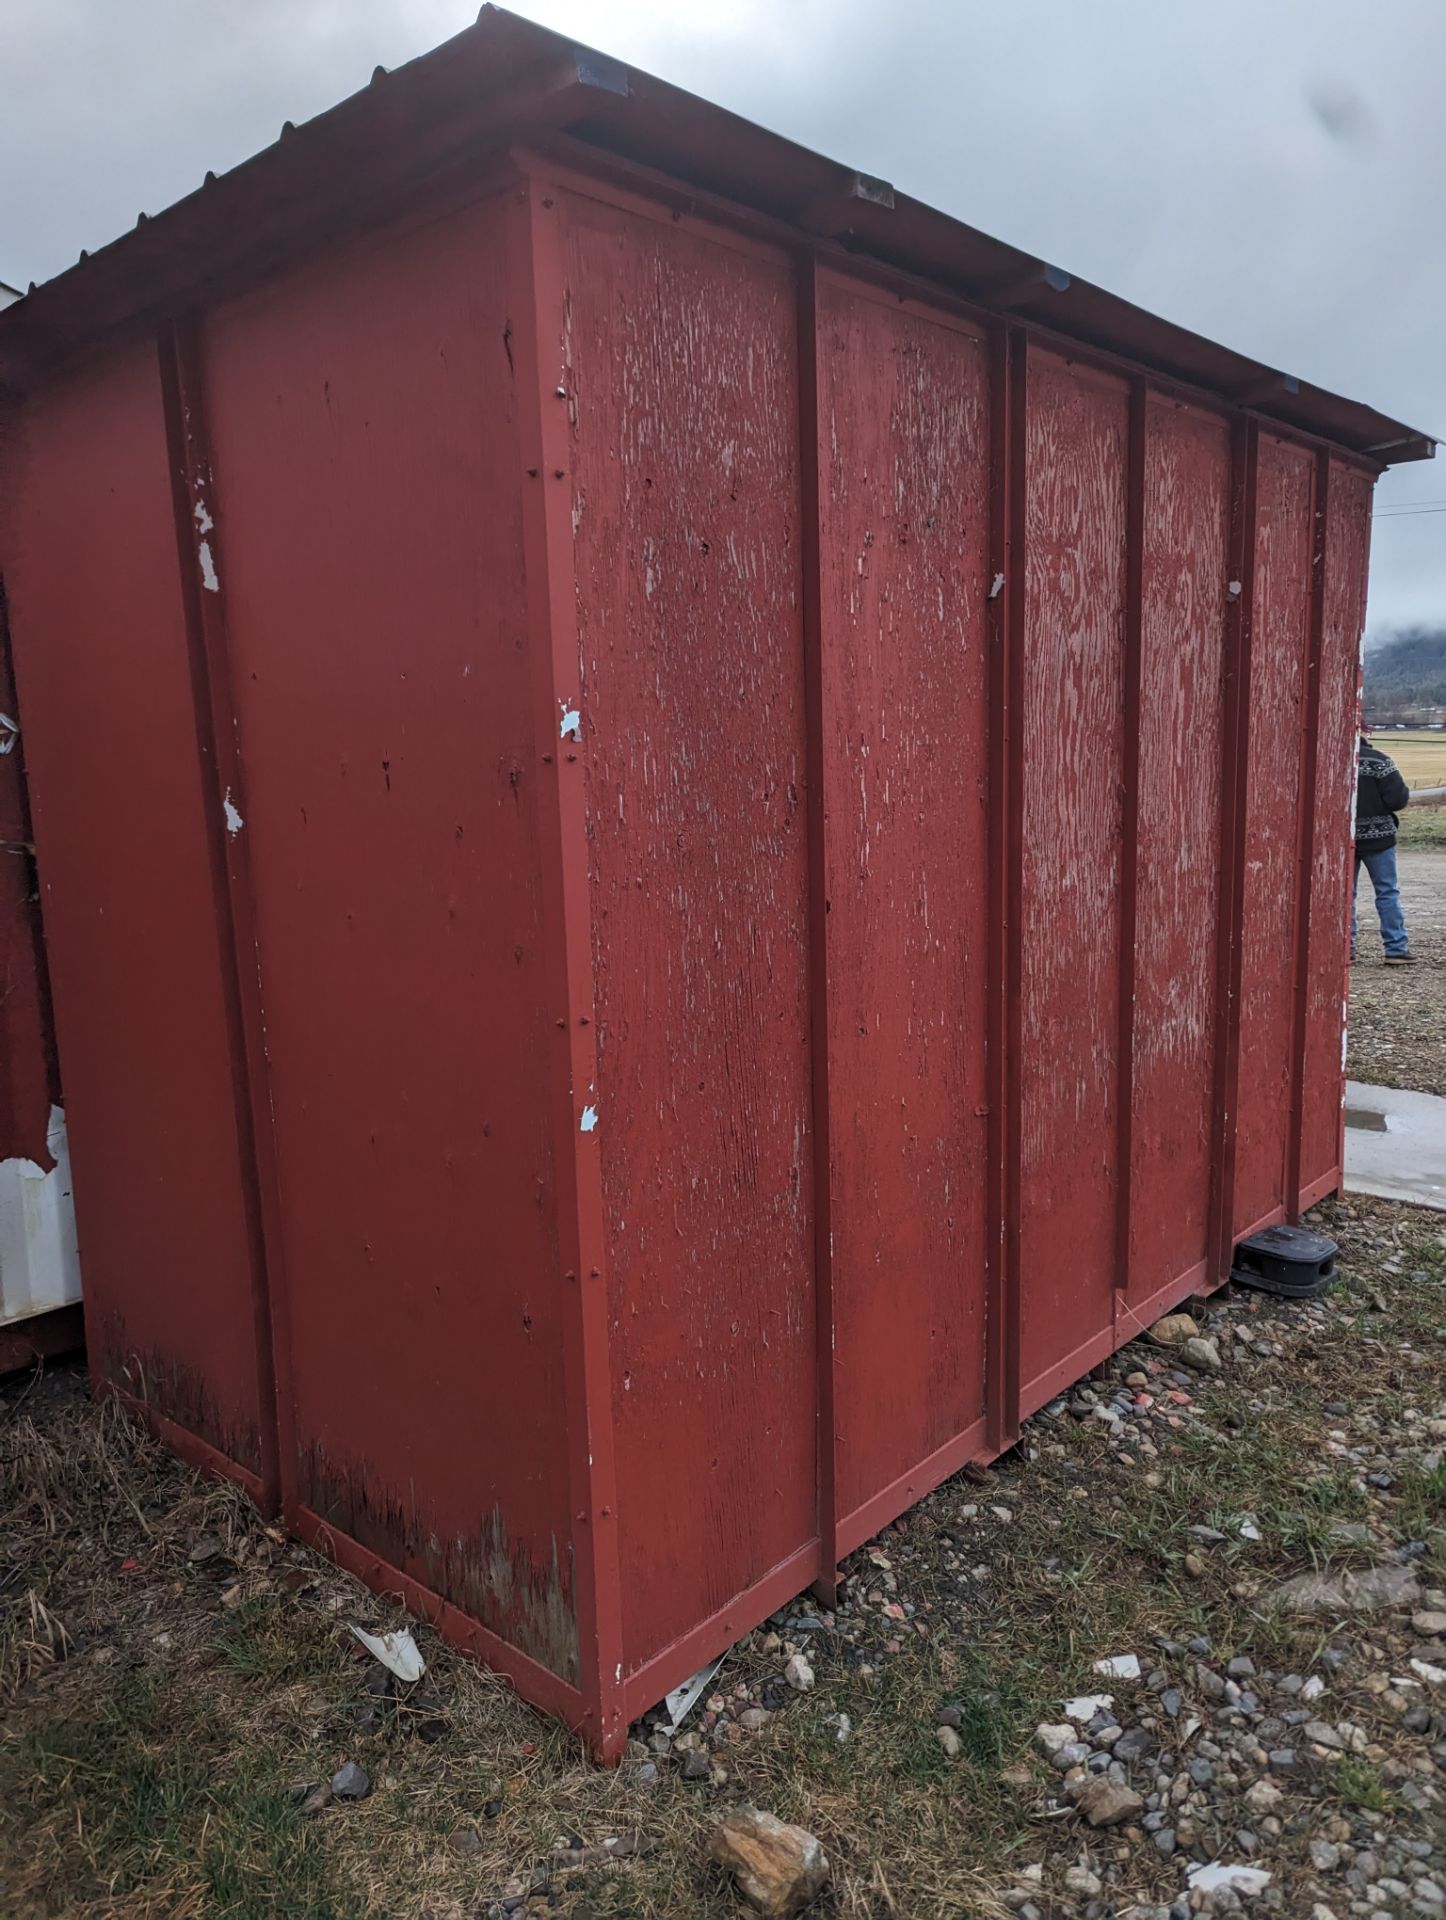 Red Portable Storage Shed